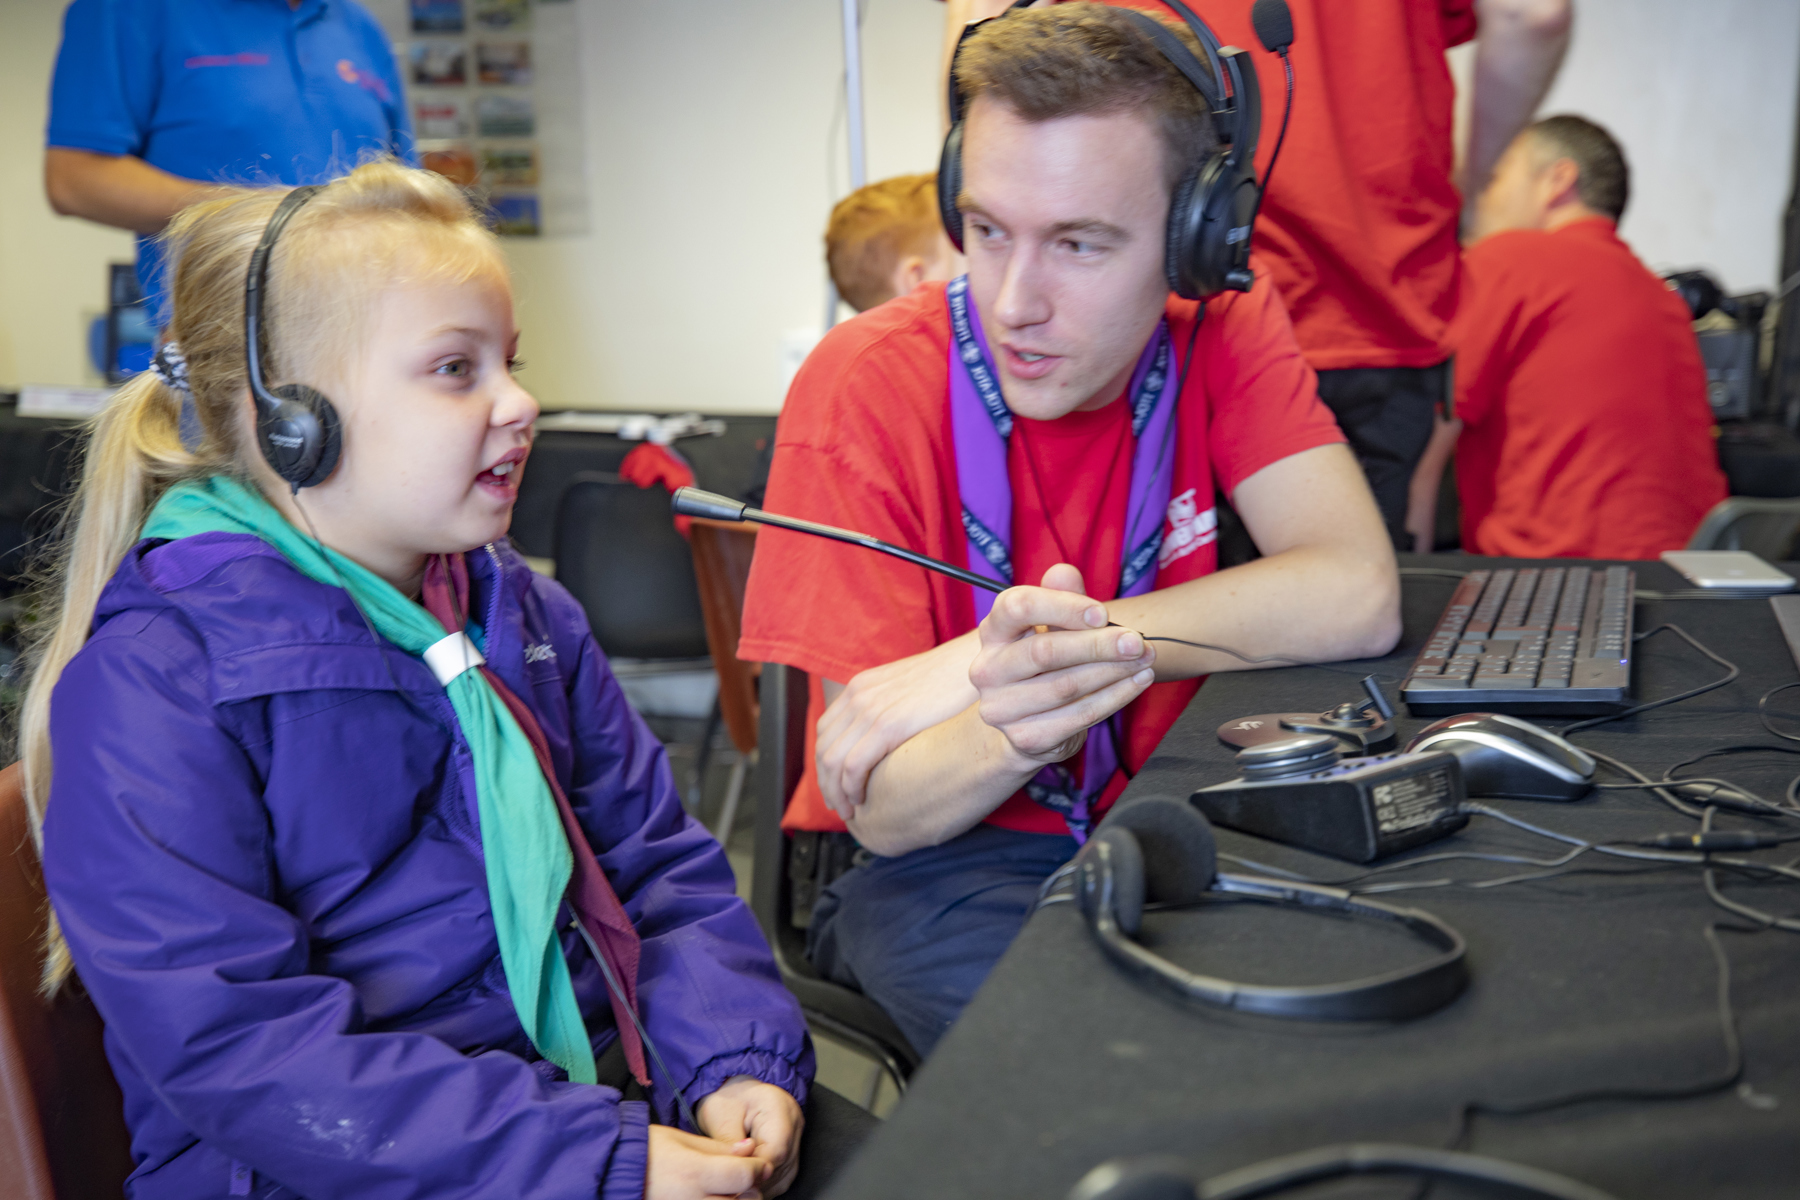 A young girl is taking part in JOTA-JOTI with an adult helping her. She is sat down, wearing headphones and speaking into the microphone by the desk. The adult is helping to hold the microphone.